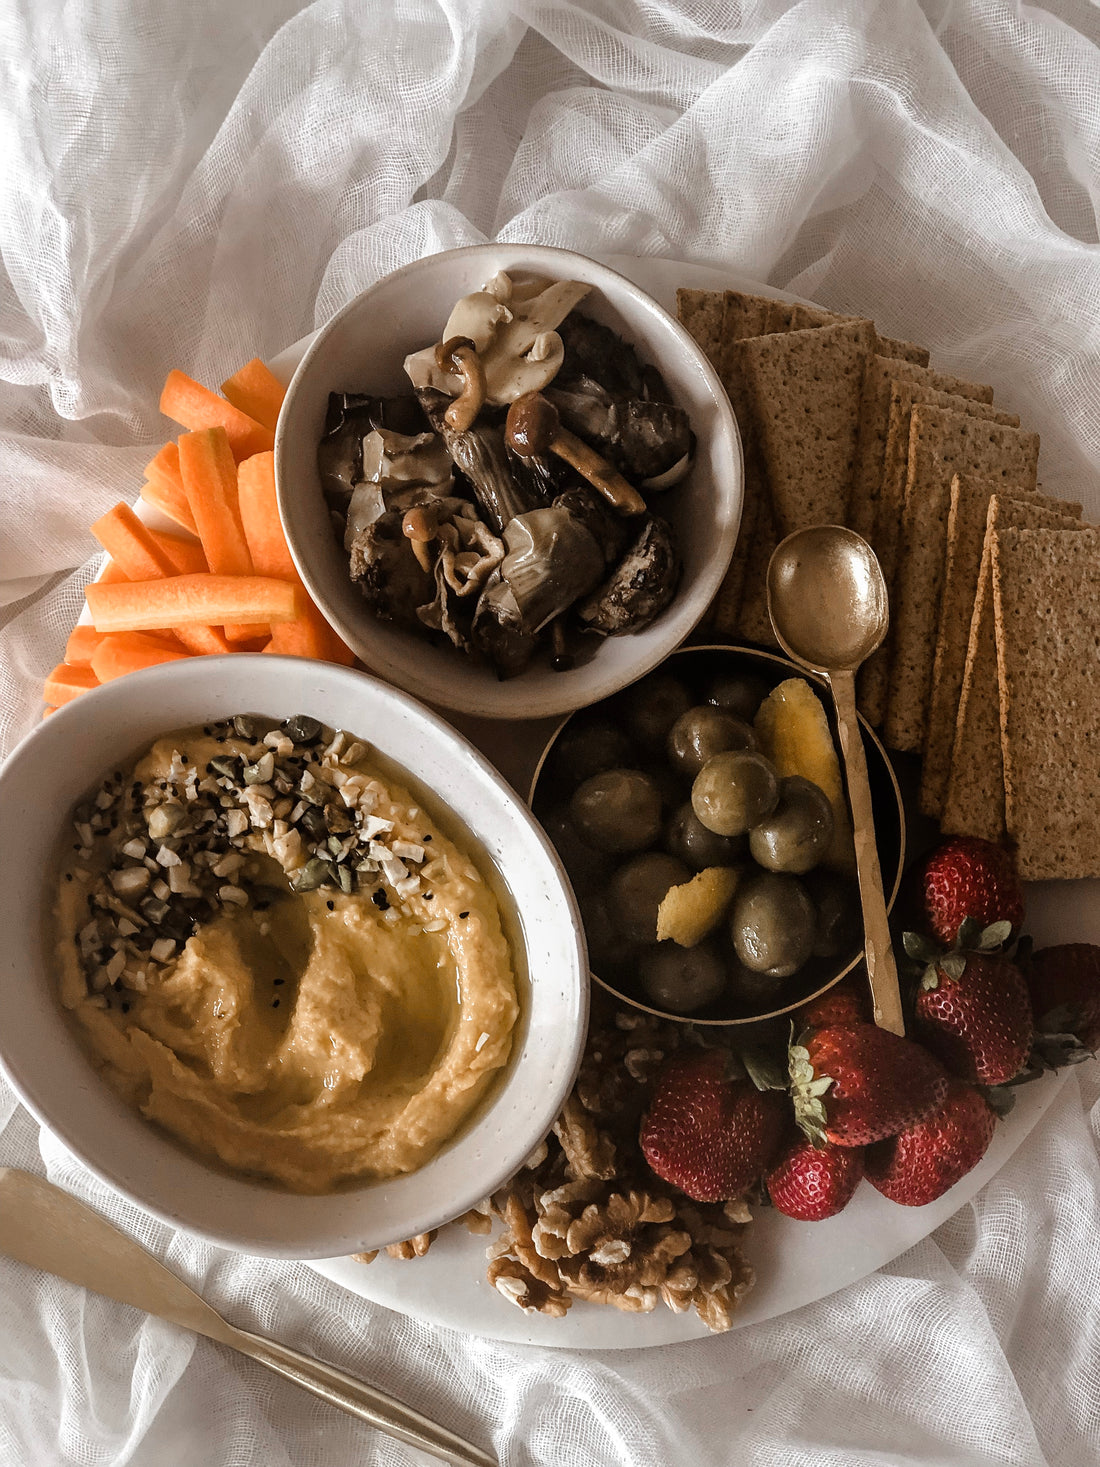 In celebration of World Vegan Day we have HOW TO- Create a Vegan grazing board because regardless of your dietary preferences, food should be a source of enjoyment.